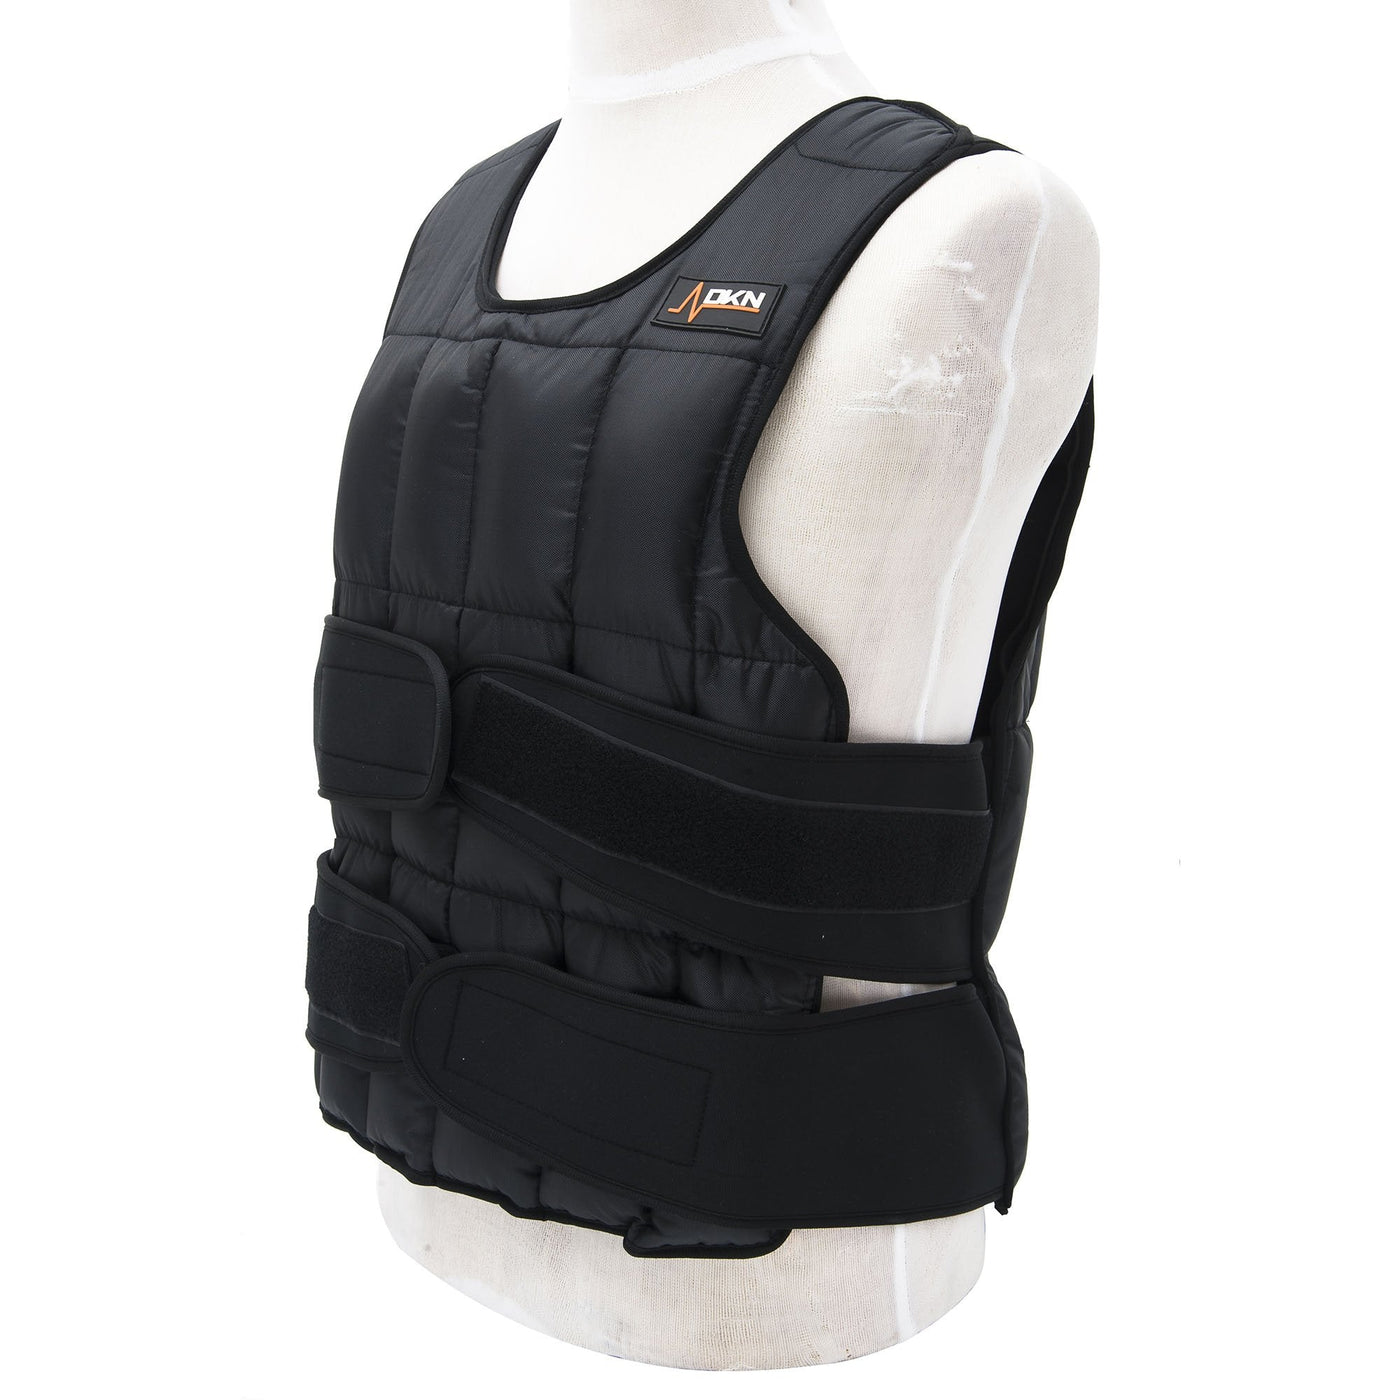 |DKN 20kg Adjustable Weighted Vest - In Use|